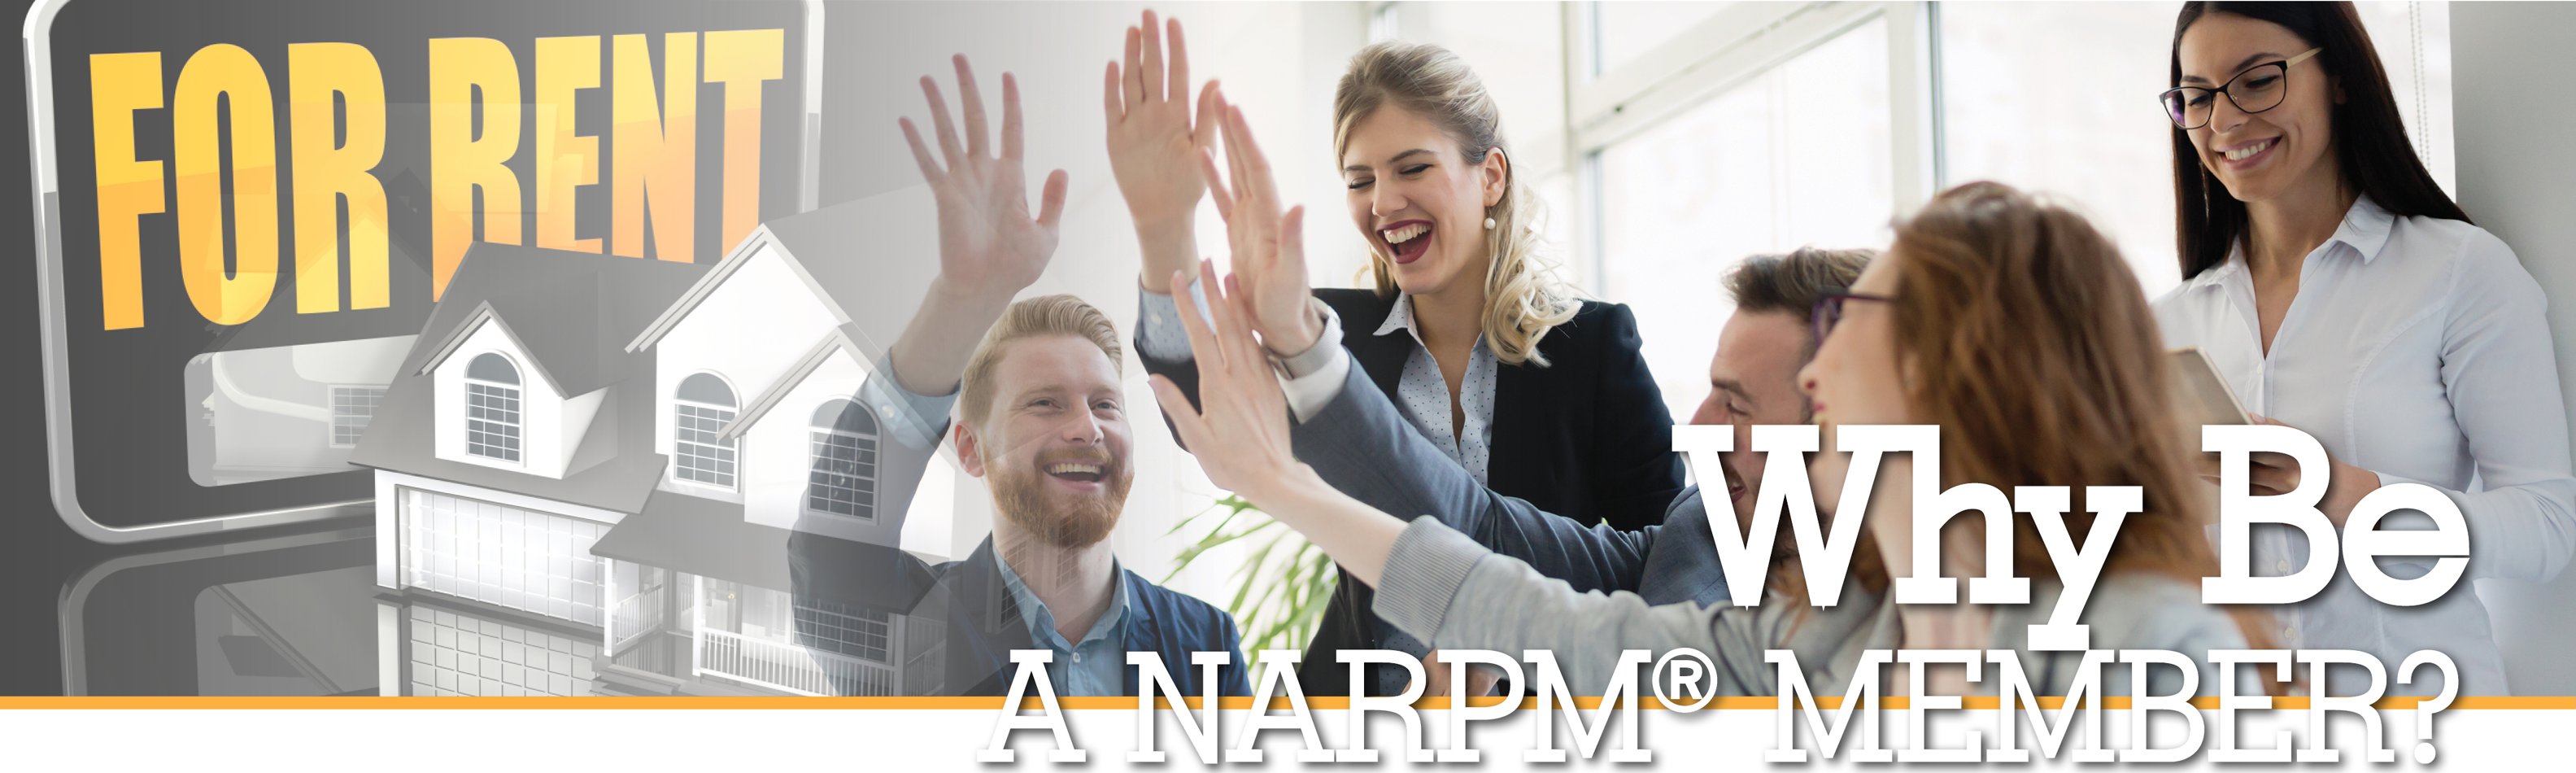 Why Be a NARPM Member